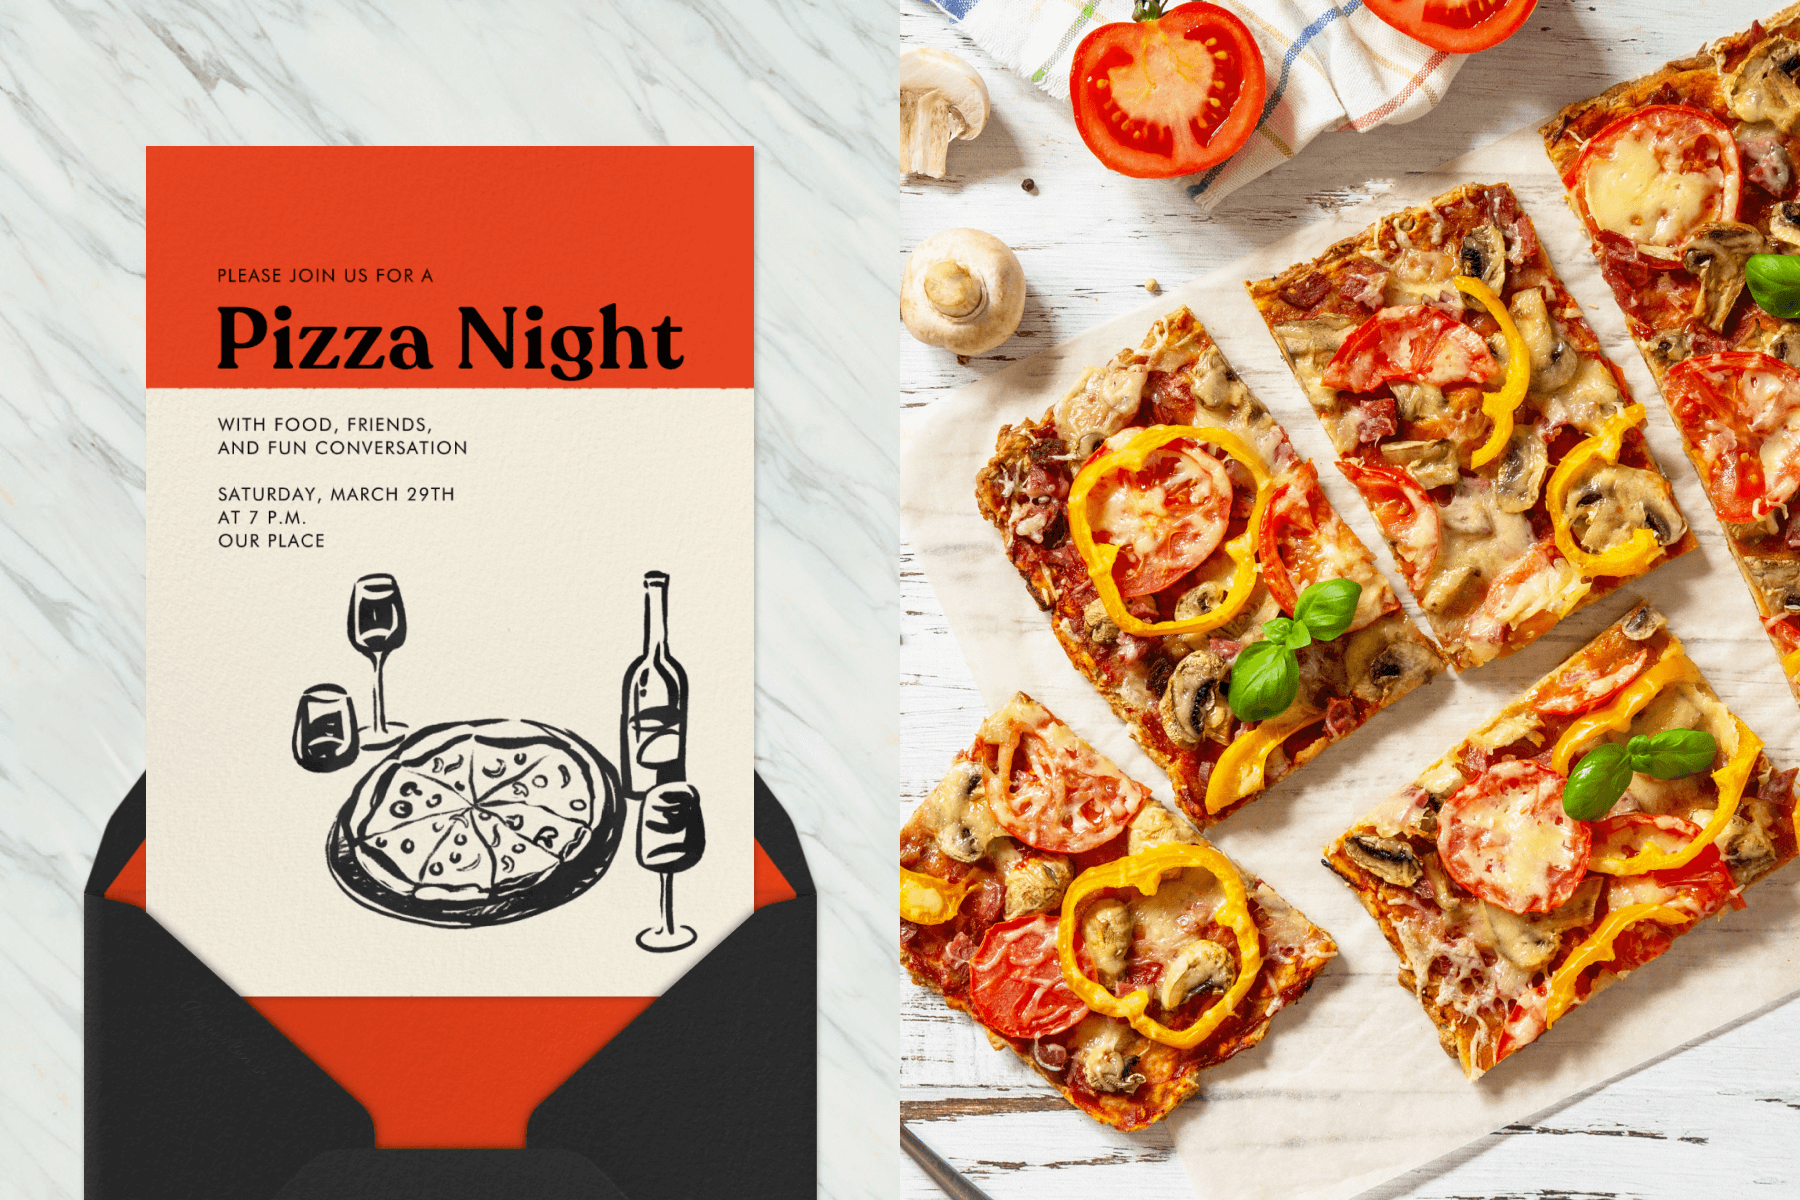 An invitation for PIZZA NIGHT with a bright red-orange stripe at the top and an illustration of a pizza and wine; rectangular pizza slices with peppers, tomatoes, and mushrooms.